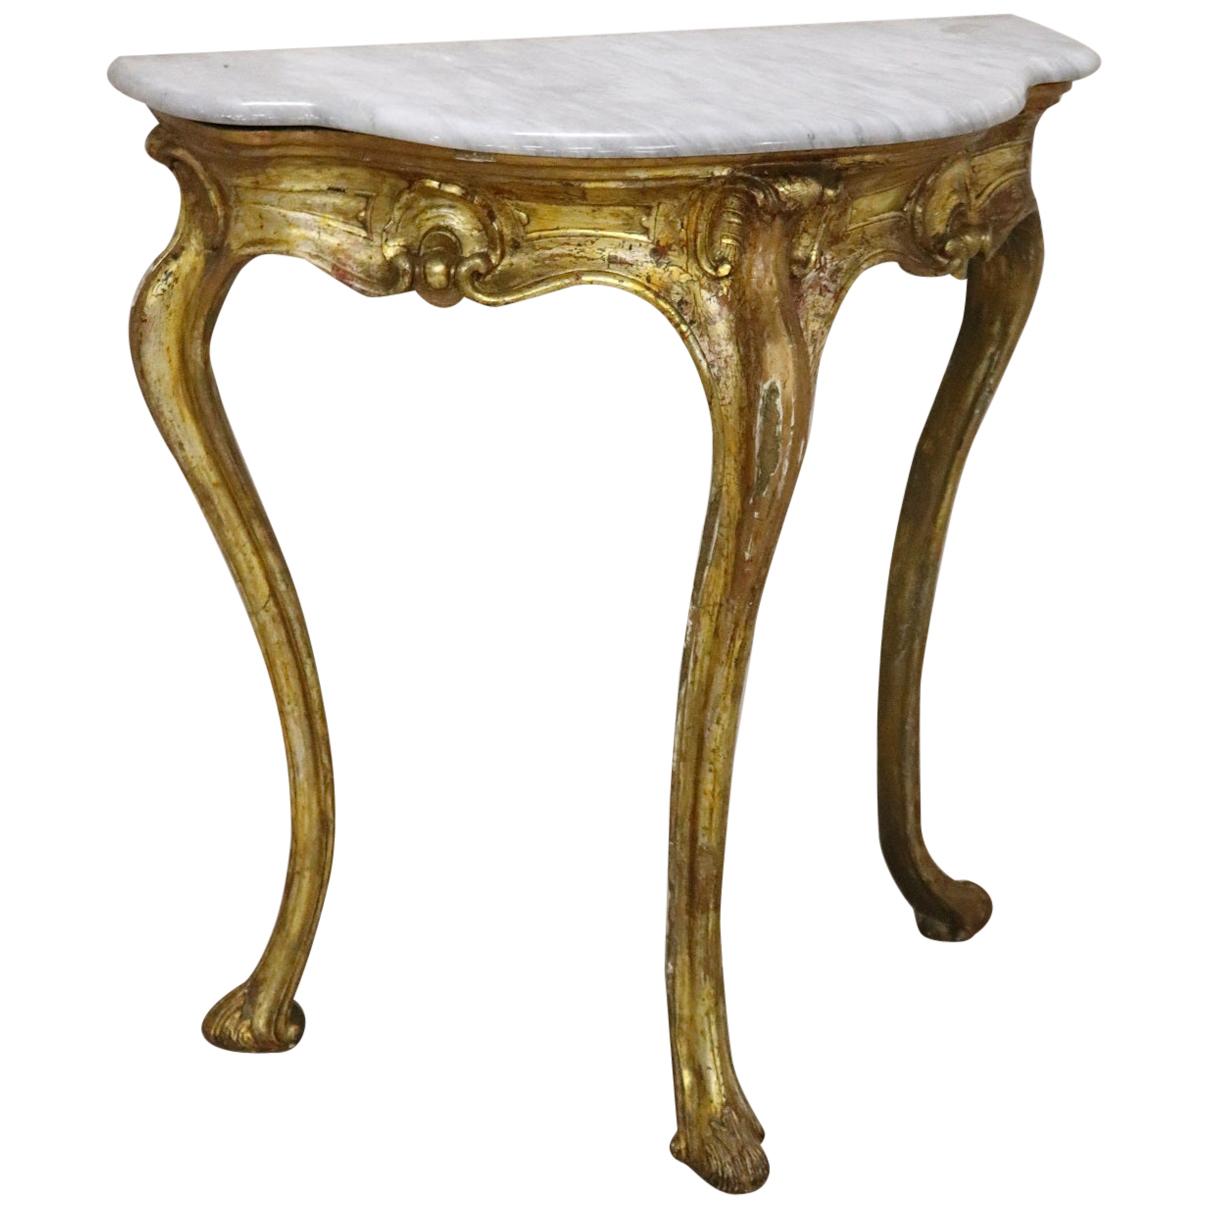 18th Century Italian Louis XV Carved and Gilded Wood Antique Console Table